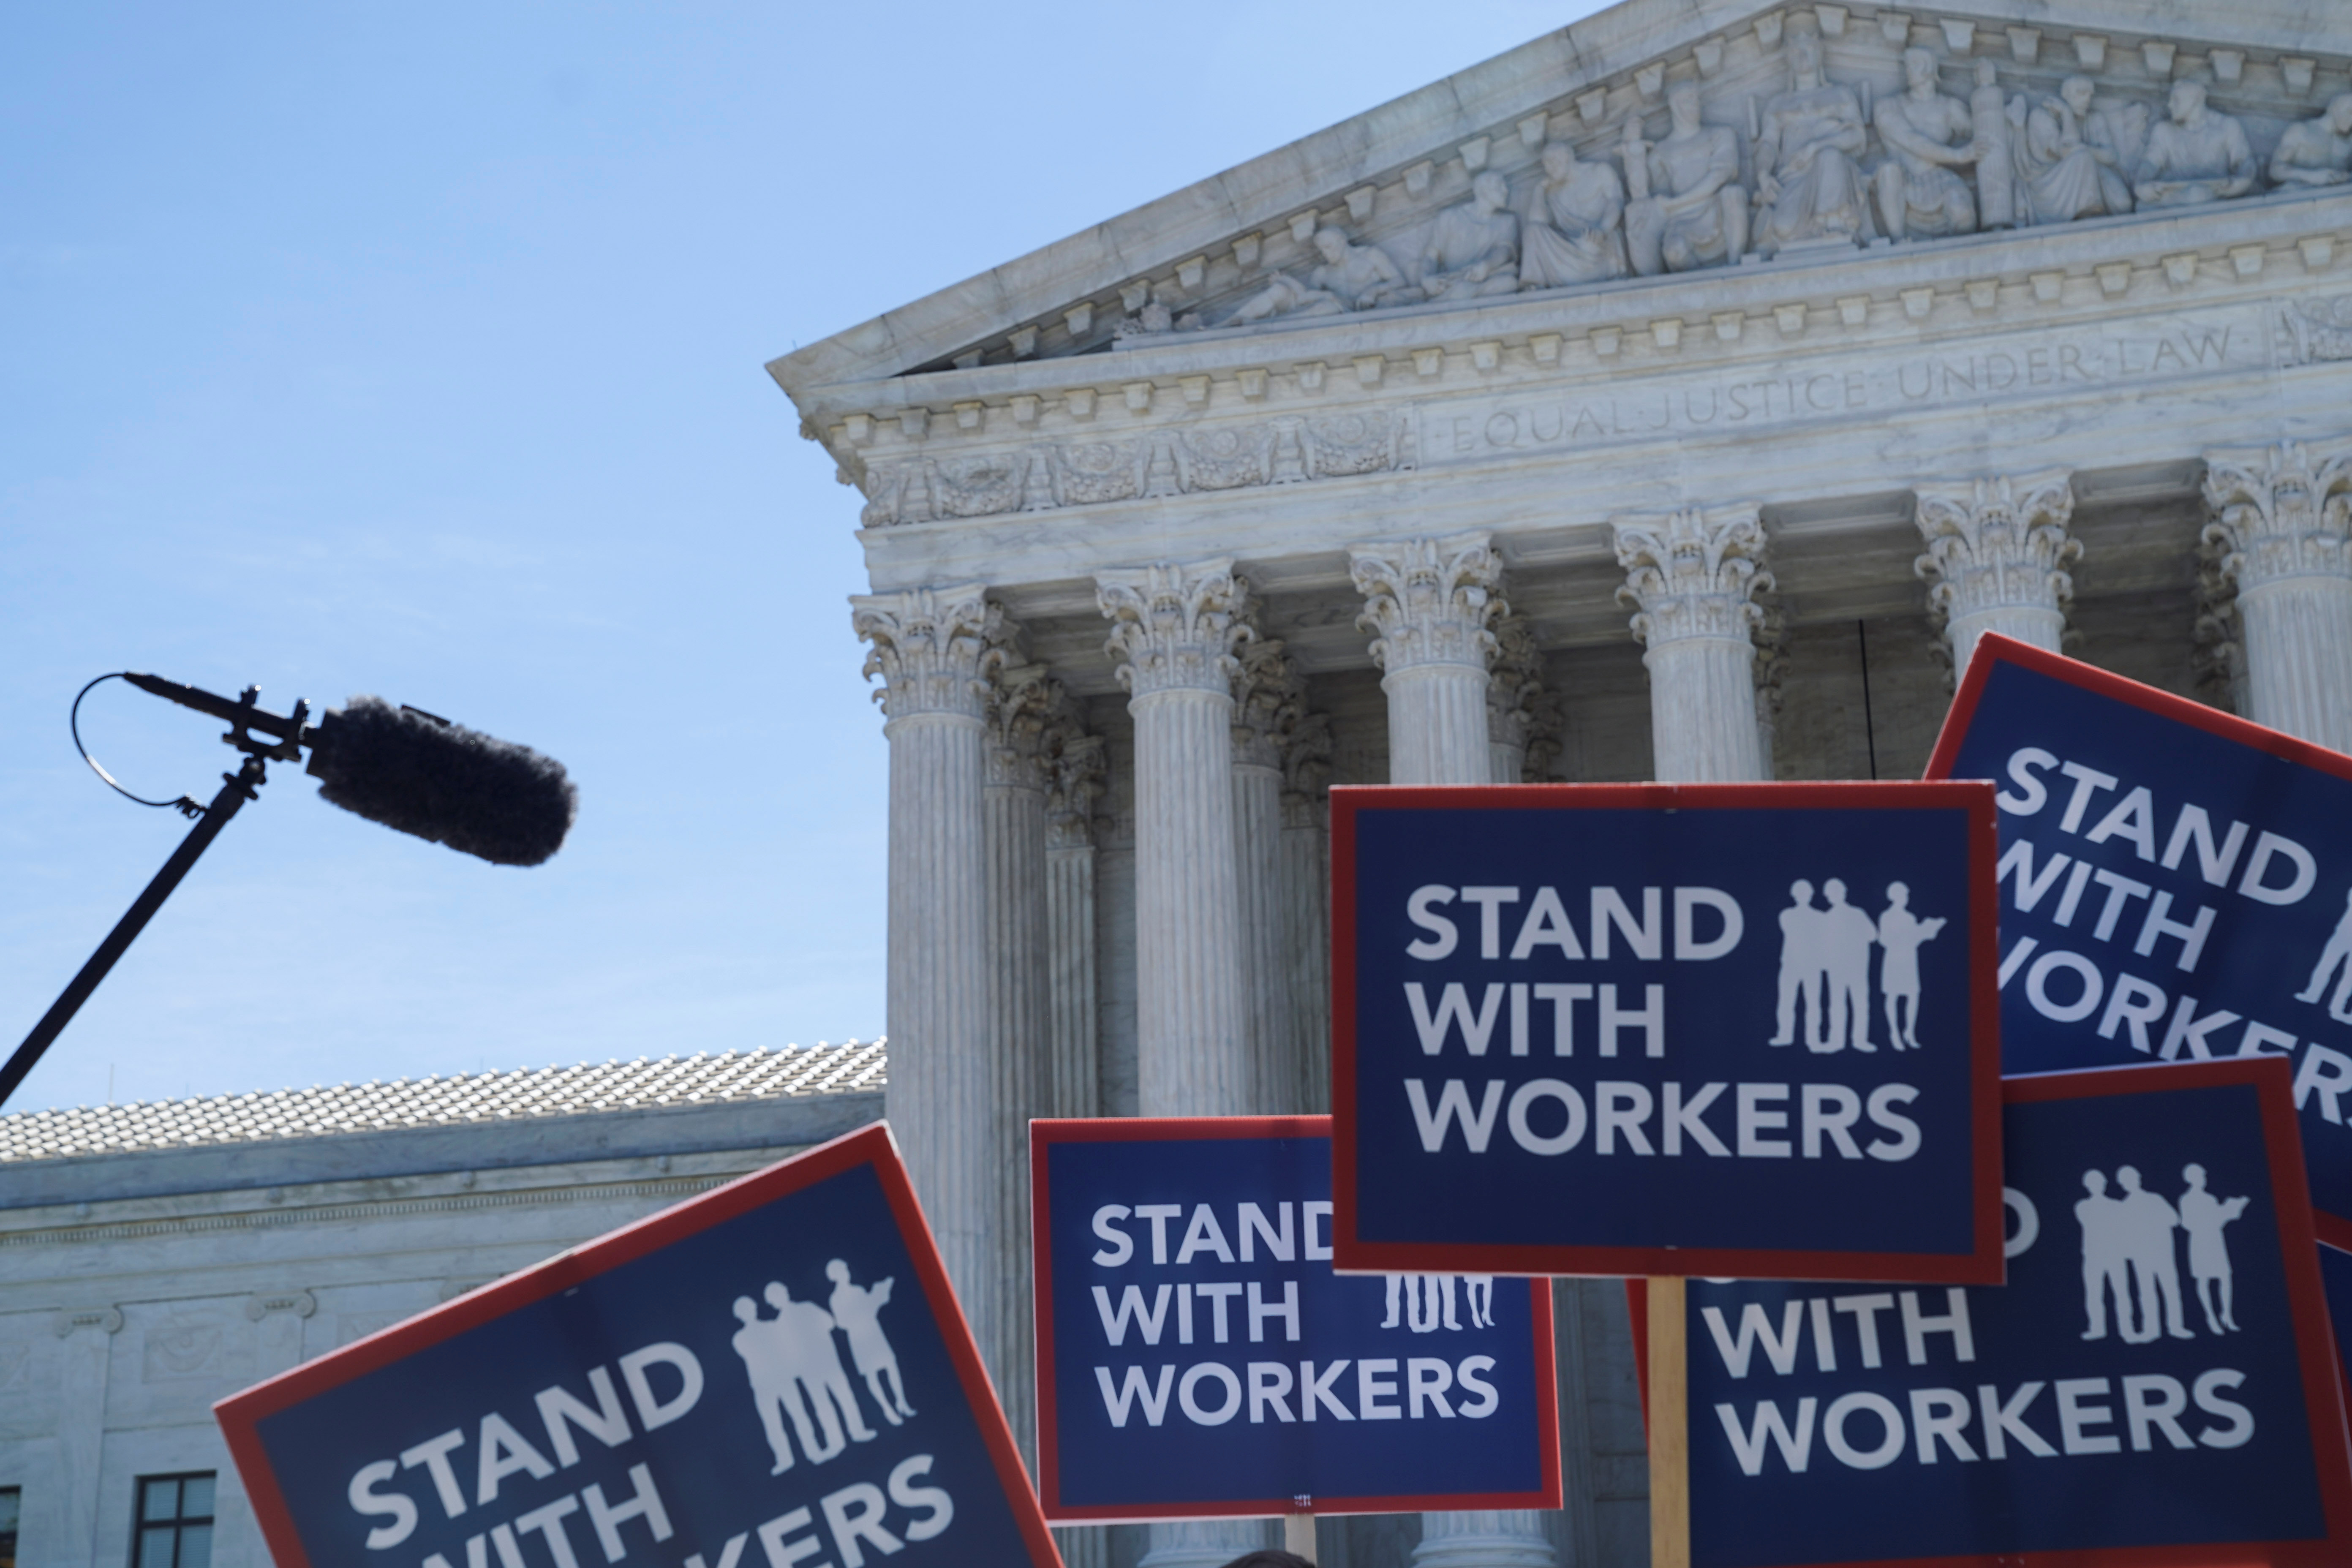 People hold signs outside the U.S. Supreme Court, waiting for the Janus v. American Federation of State, County, and Municipal Employees case, June 25, 2018. REUTERS/Toya Sarno Jordan